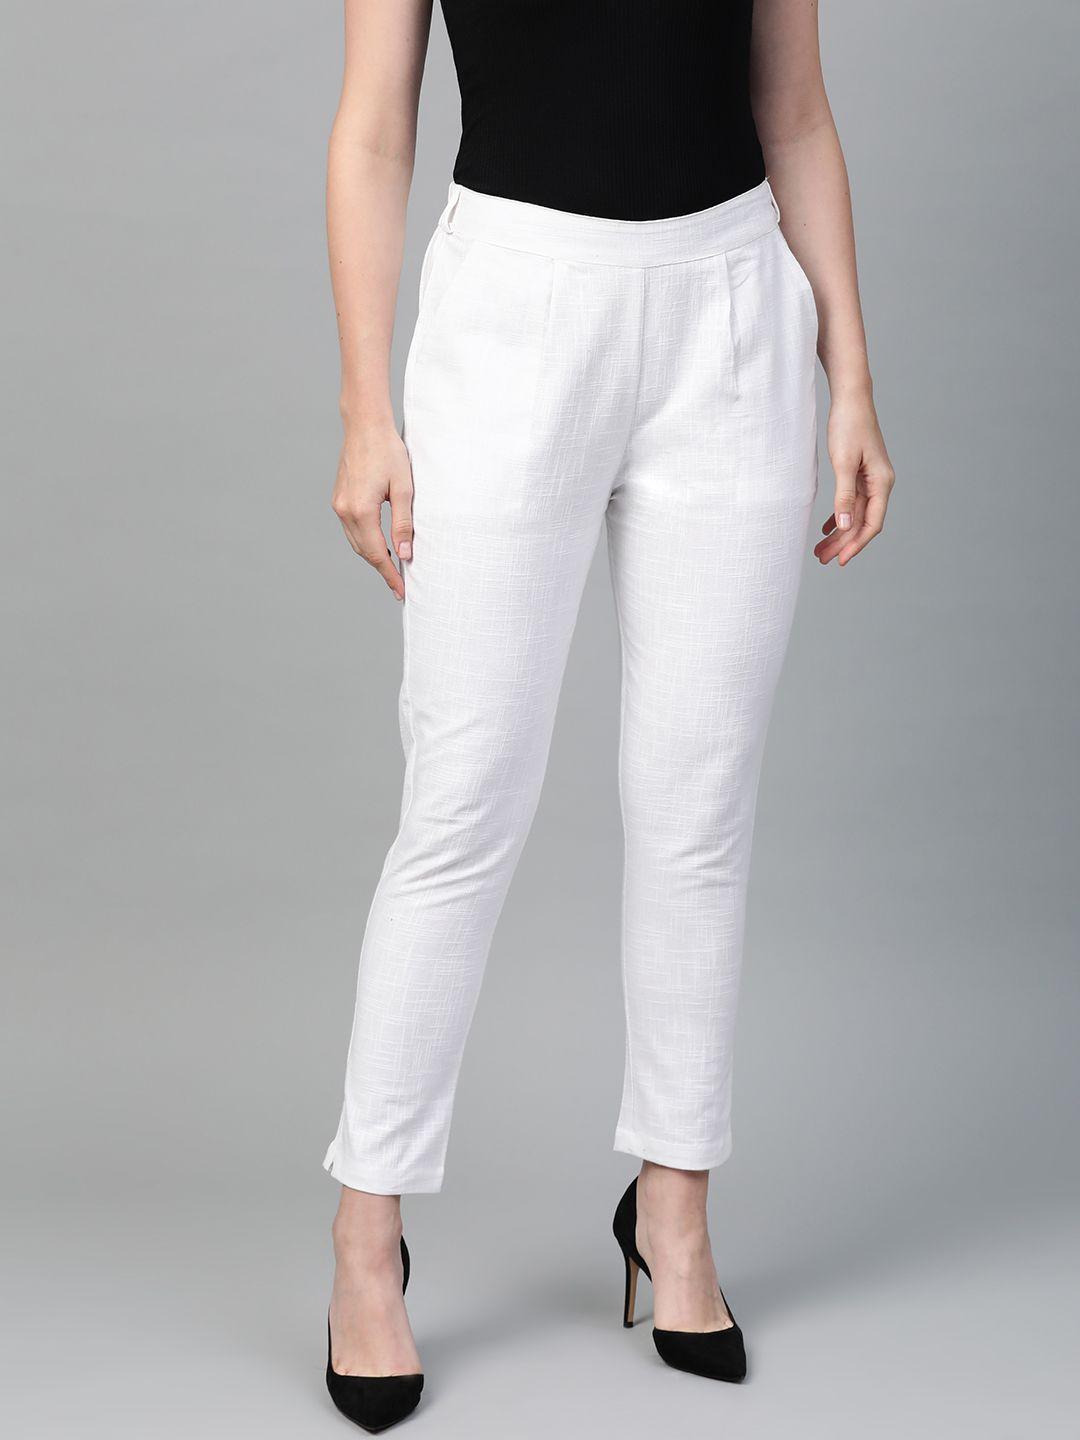 yash gallery women white regular fit solid trousers